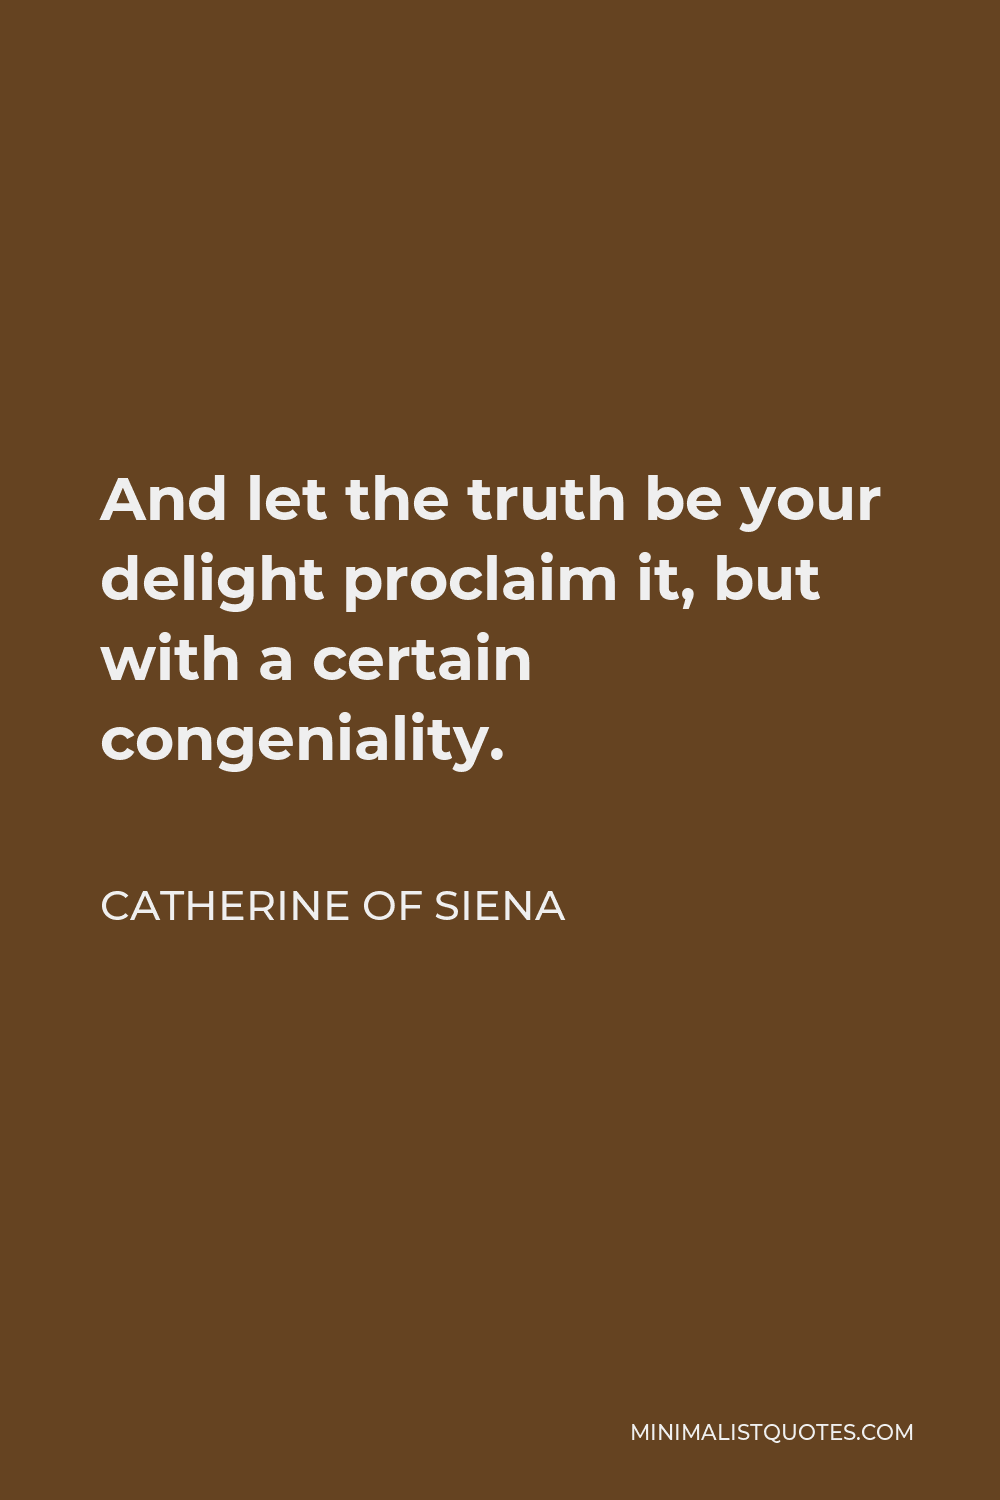 Catherine of Siena Quote - And let the truth be your delight proclaim it, but with a certain congeniality.